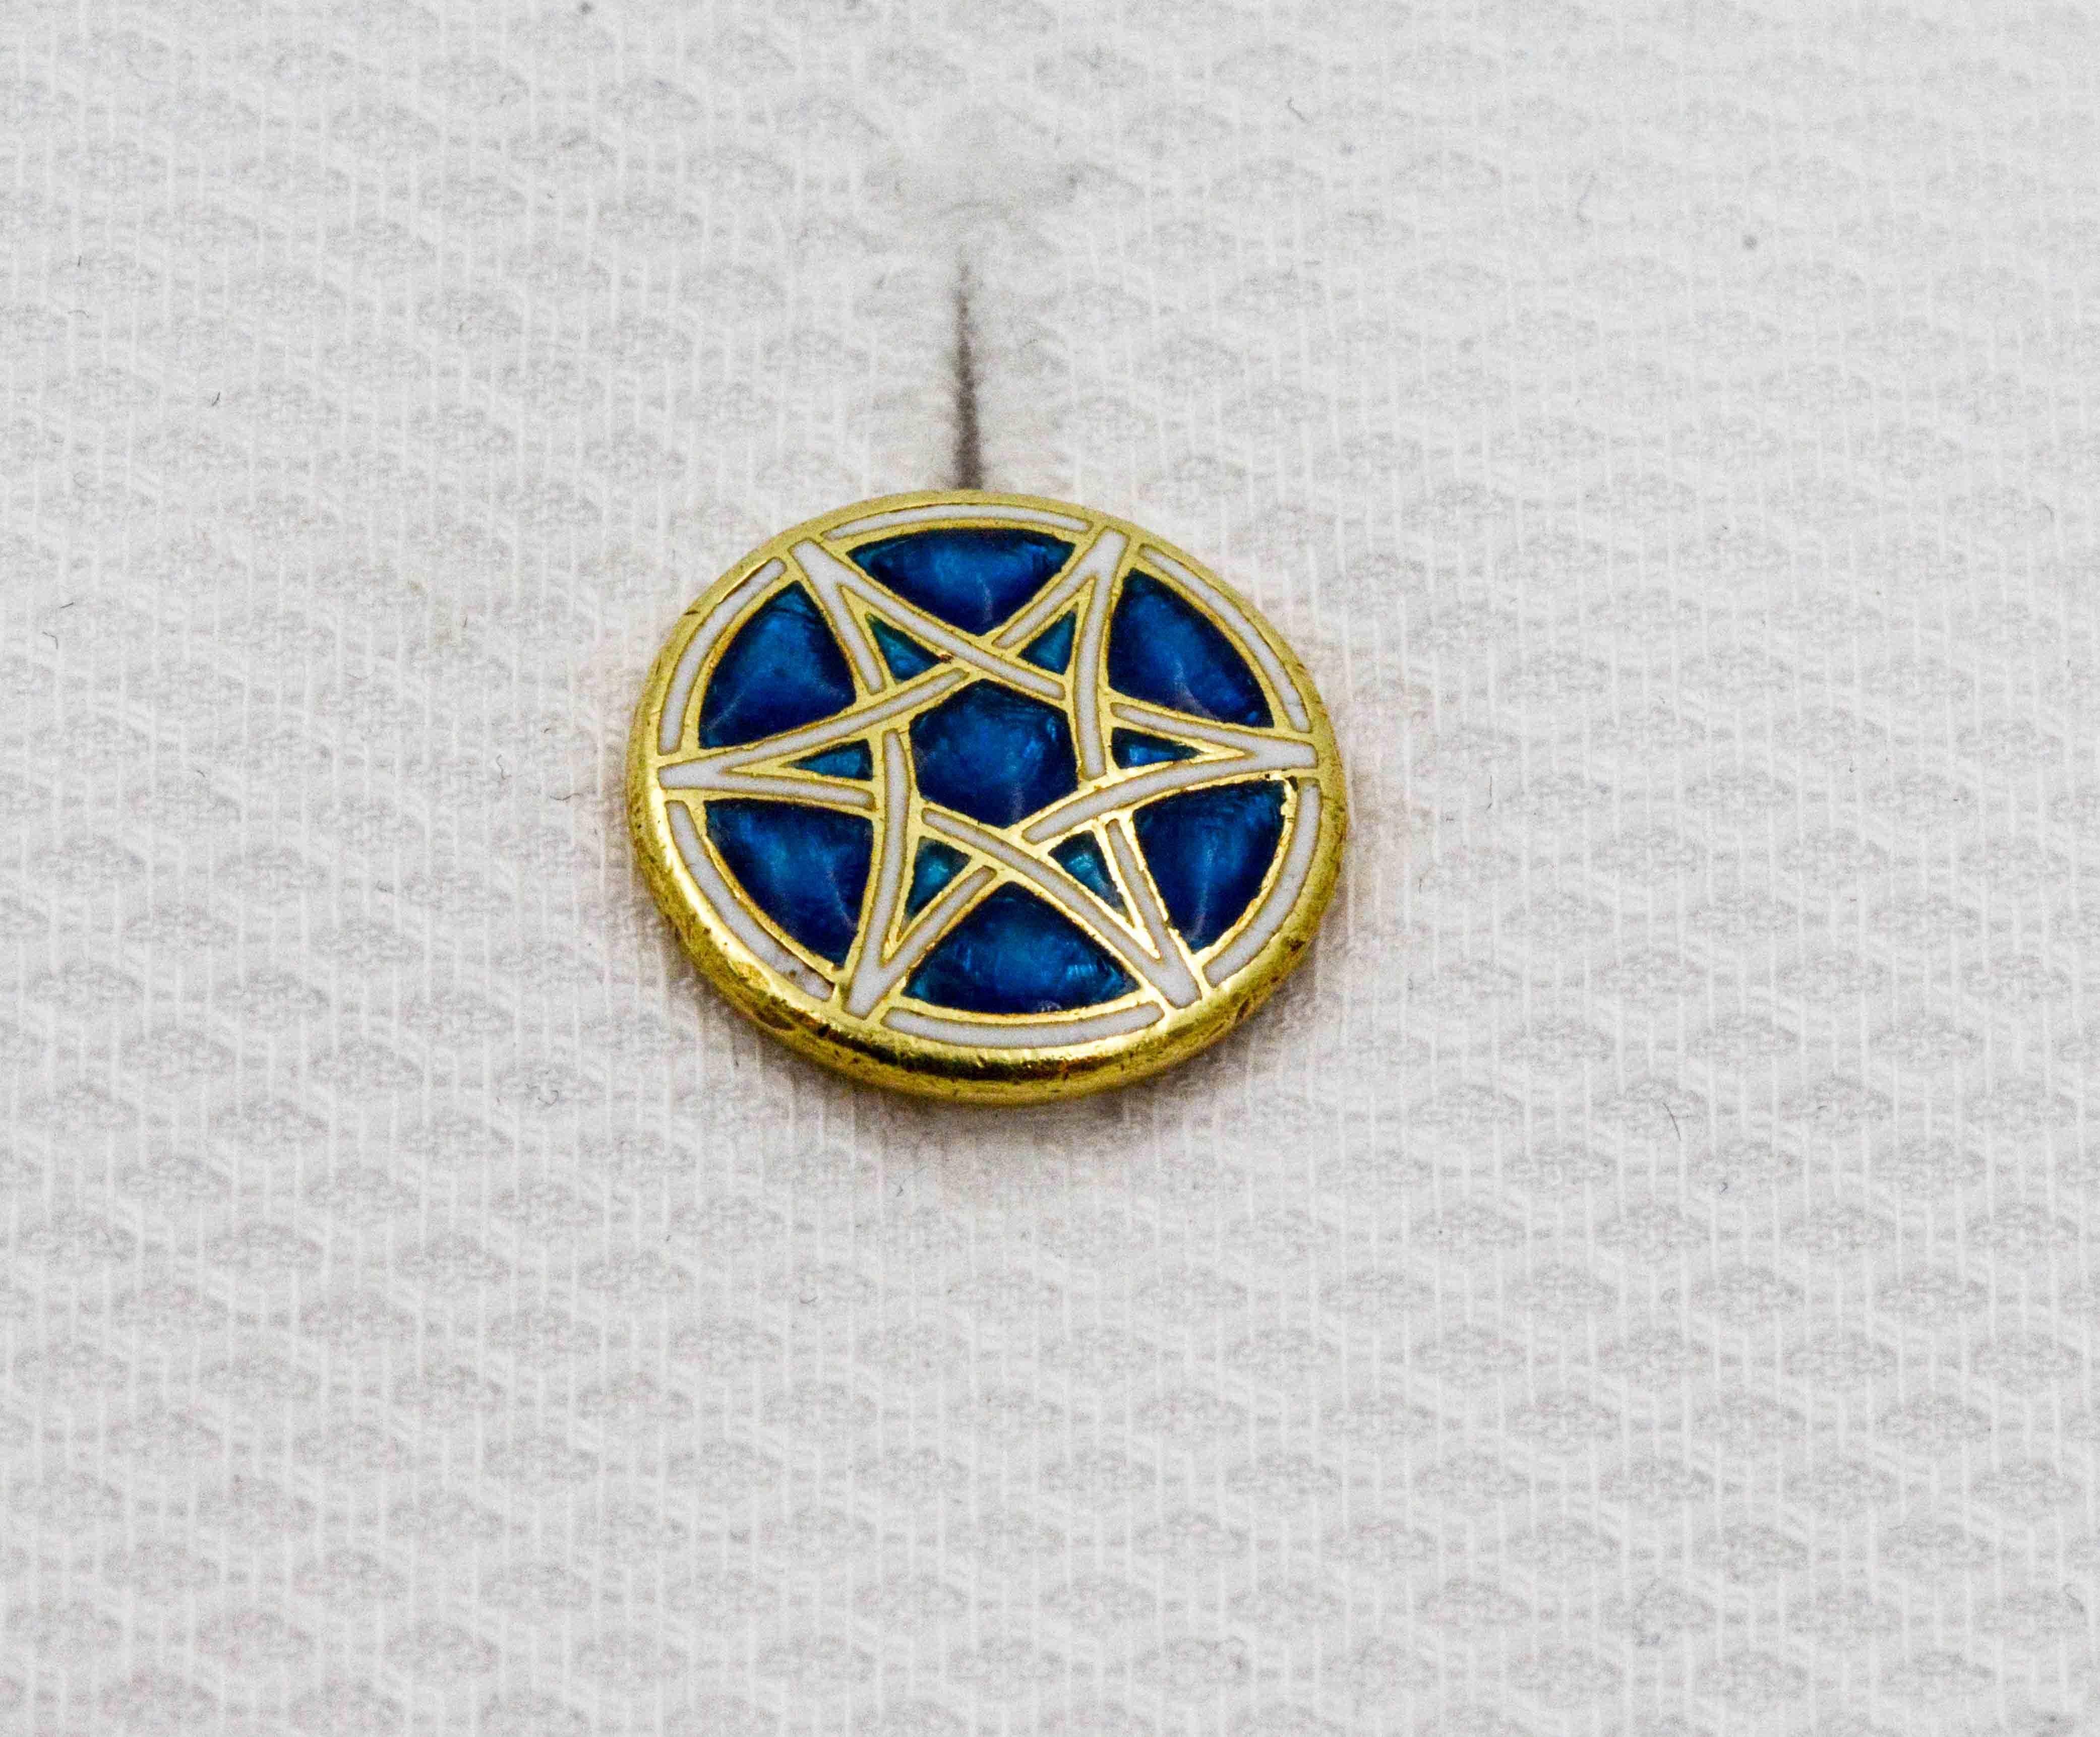 Paint the town or travel abroad--these blue enamel cuff links make an artful companion either way. Crafted in 1920, these 18 karat yellow gold Star of David cuff links certainly have an imaginable story to tell. These immaculate cuff links have